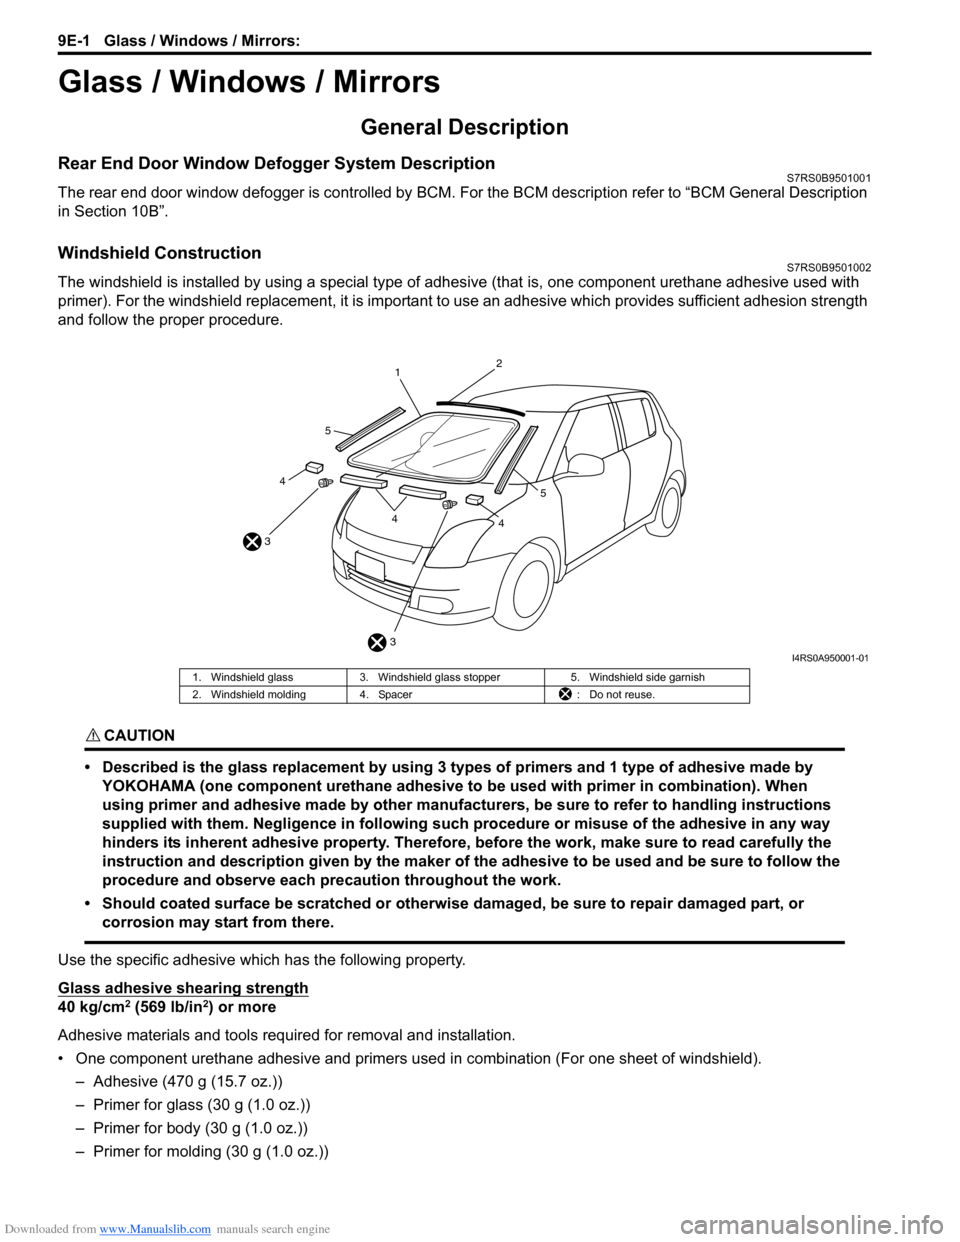 SUZUKI SWIFT 2006 2.G Service Manual Online Downloaded from www.Manualslib.com manuals search engine 9E-1 Glass / Windows / Mirrors: 
Body, Cab and Accessories
Glass / Windows / Mirrors
General Description
Rear End Door Window Defogger System D